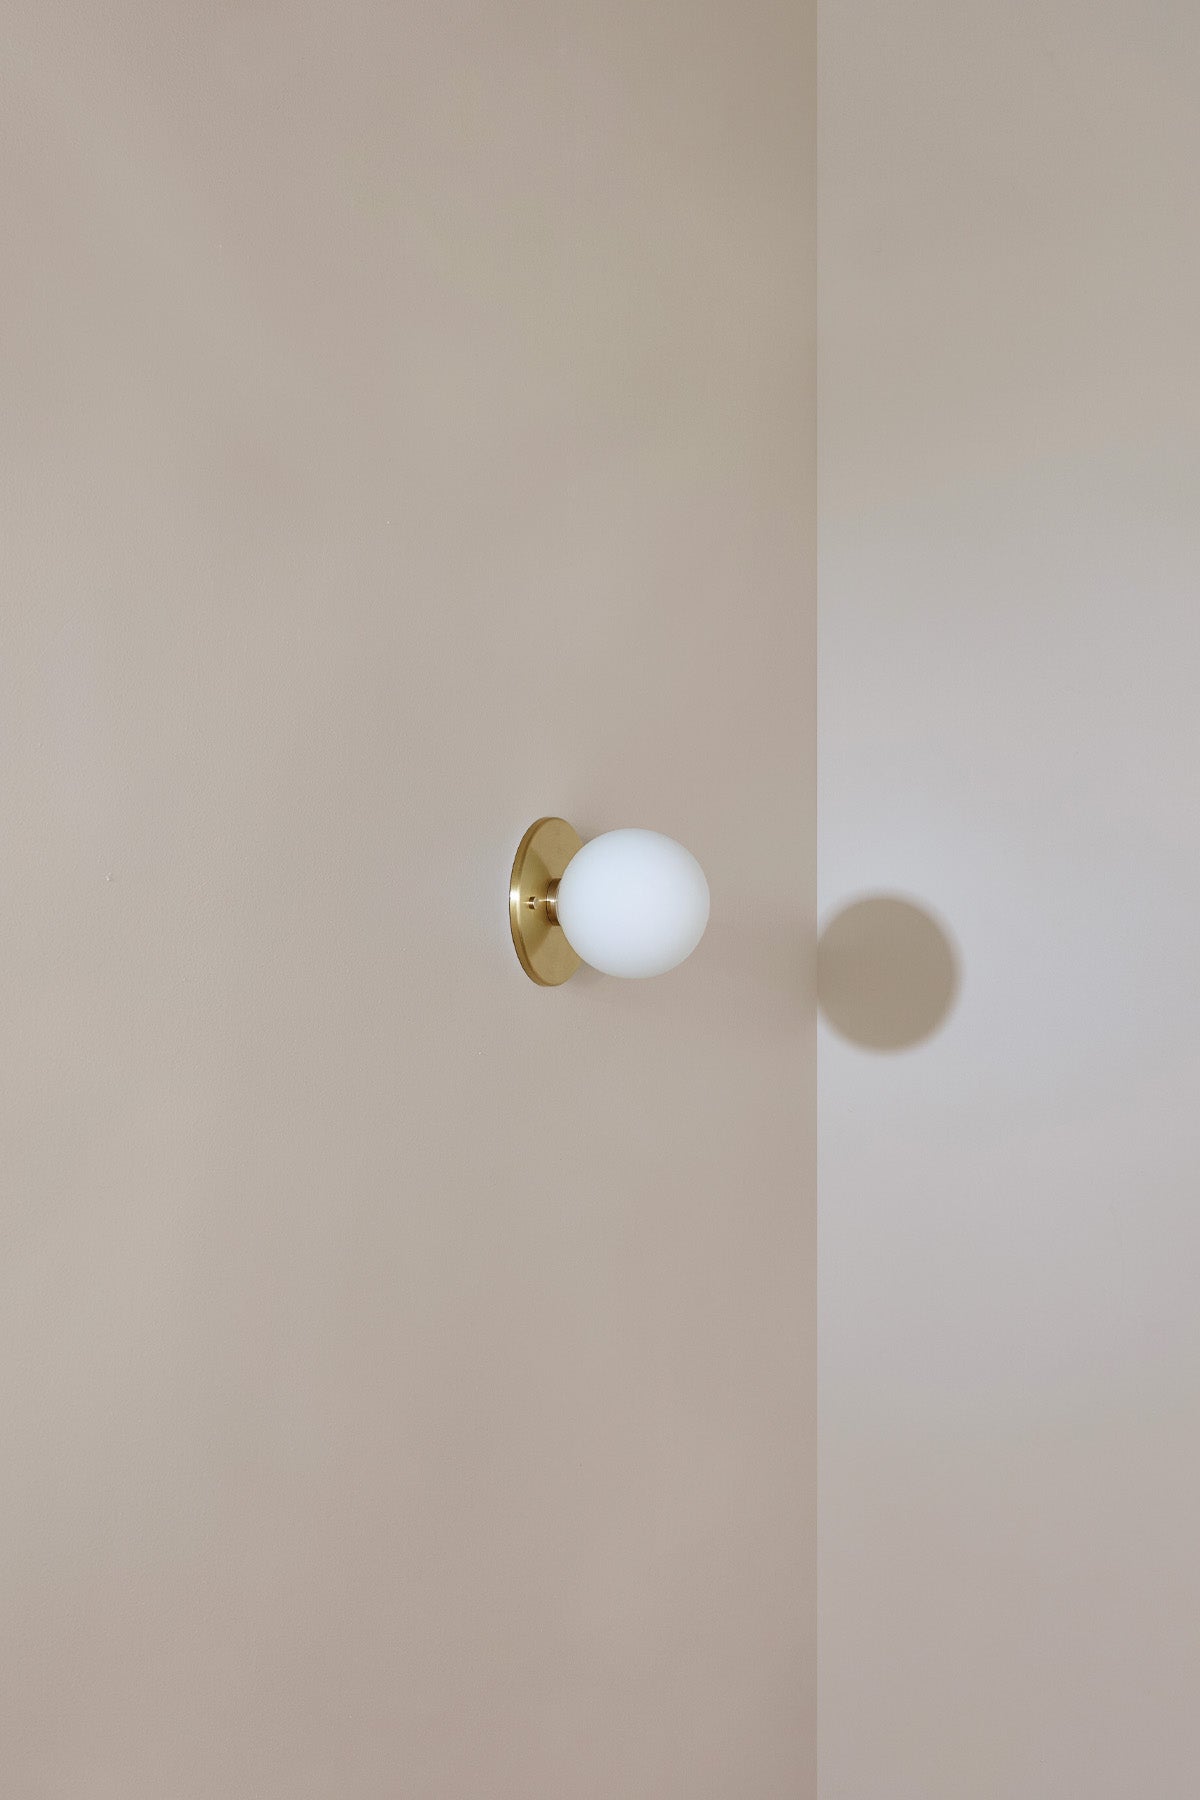 Orb Surface Sconce, Small - Marz DesignsMarz Designs